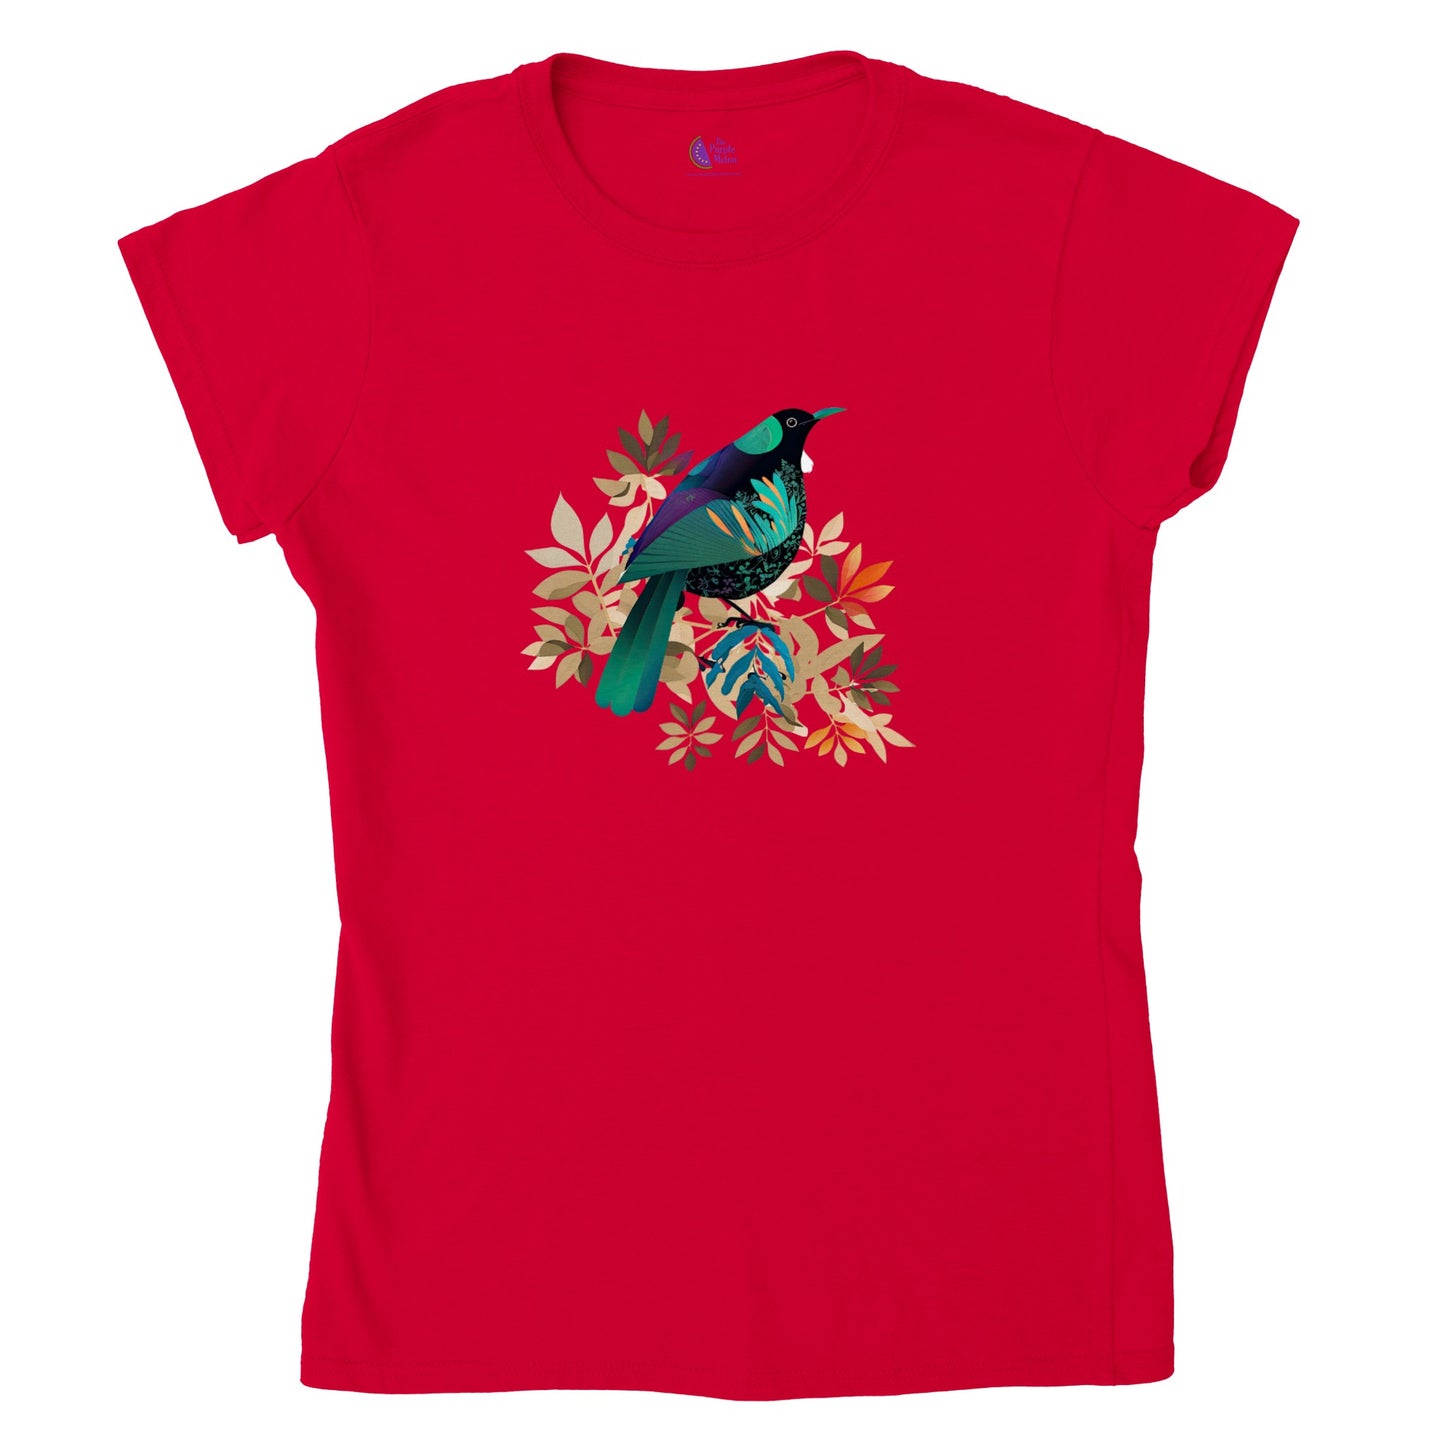 Red t-shirt with a contemporary new zealand tui bird print